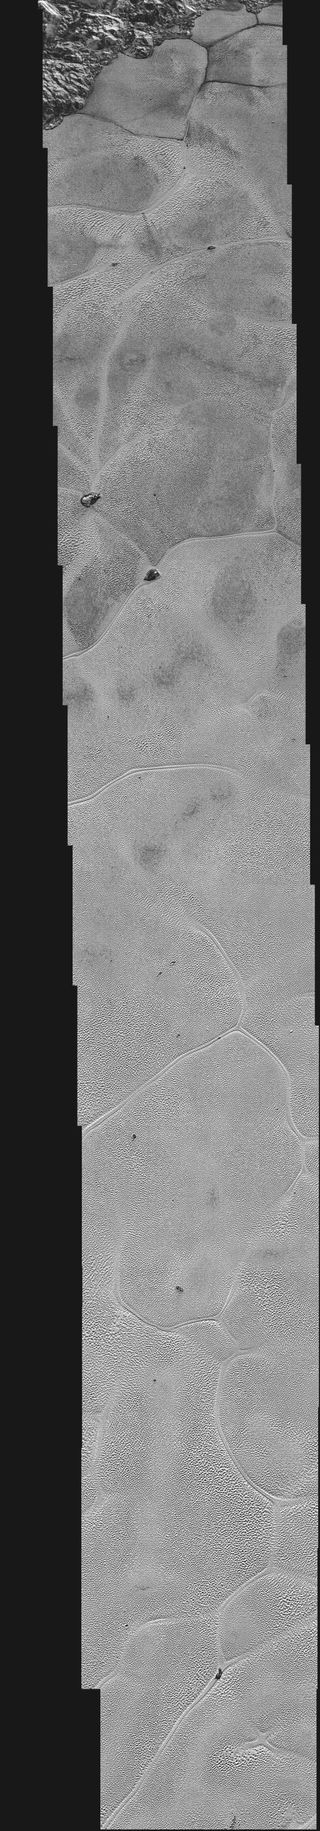 The images that make up this high-resolution view of the icy Pluto plain known as Sputnik Planum was captured by NASA's New Horizons probe on July 14, 2015.